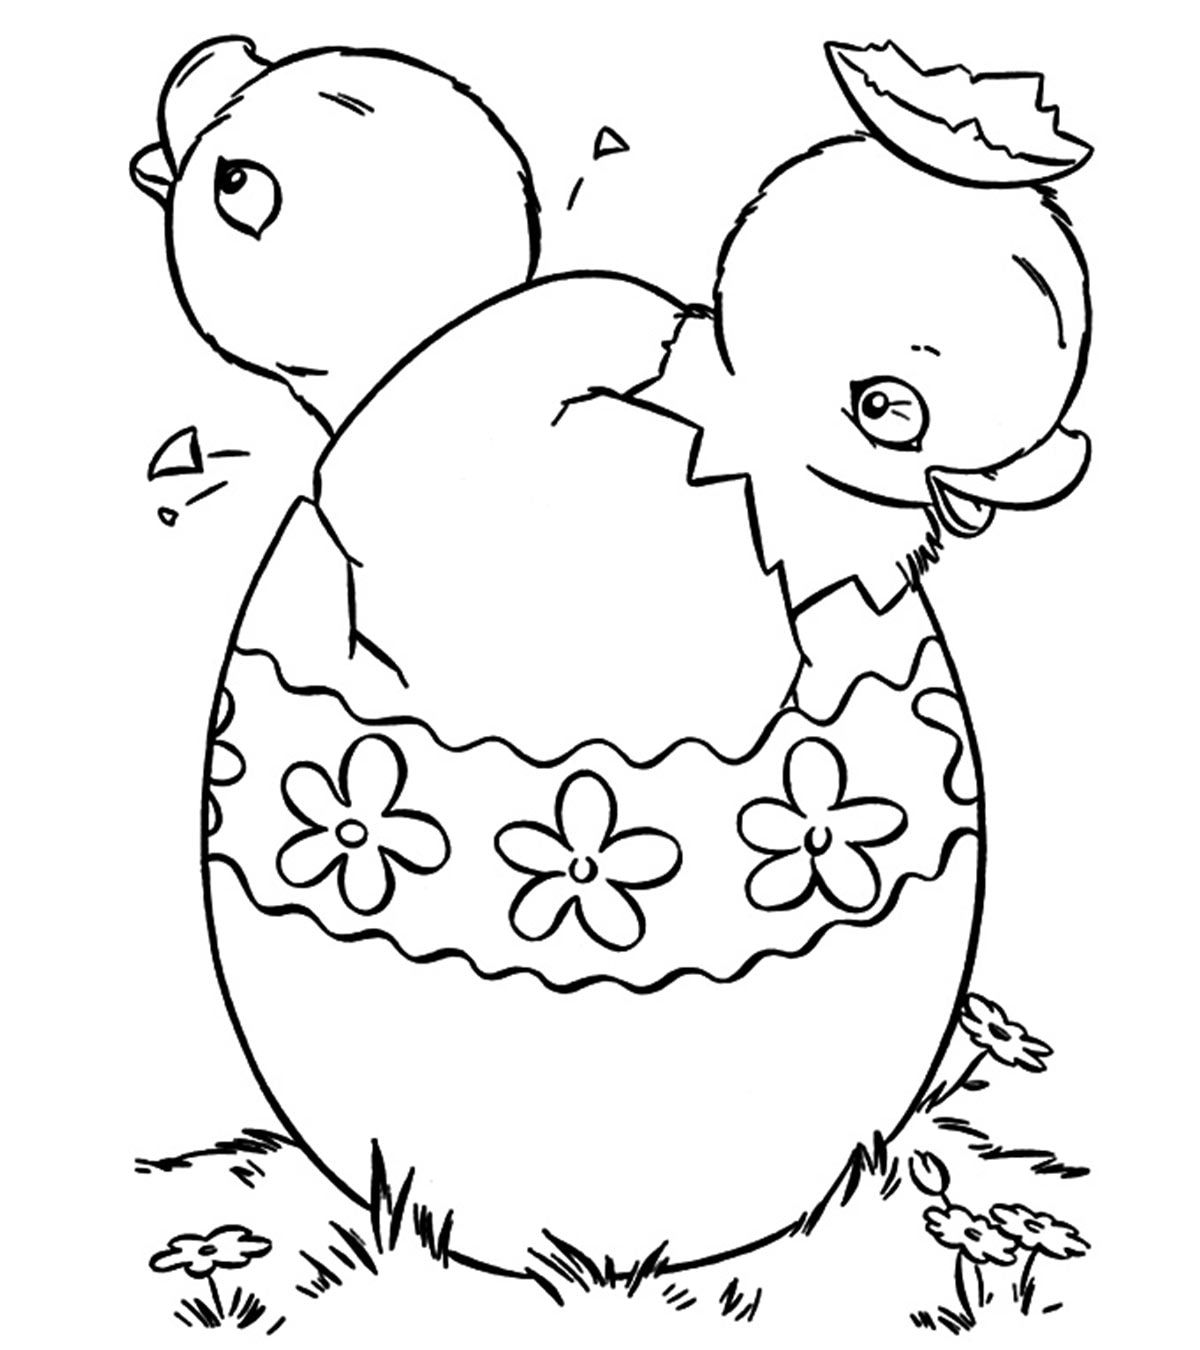 25 Amazing Easter Egg Coloring Pages Your Toddler Will Love To Color_image